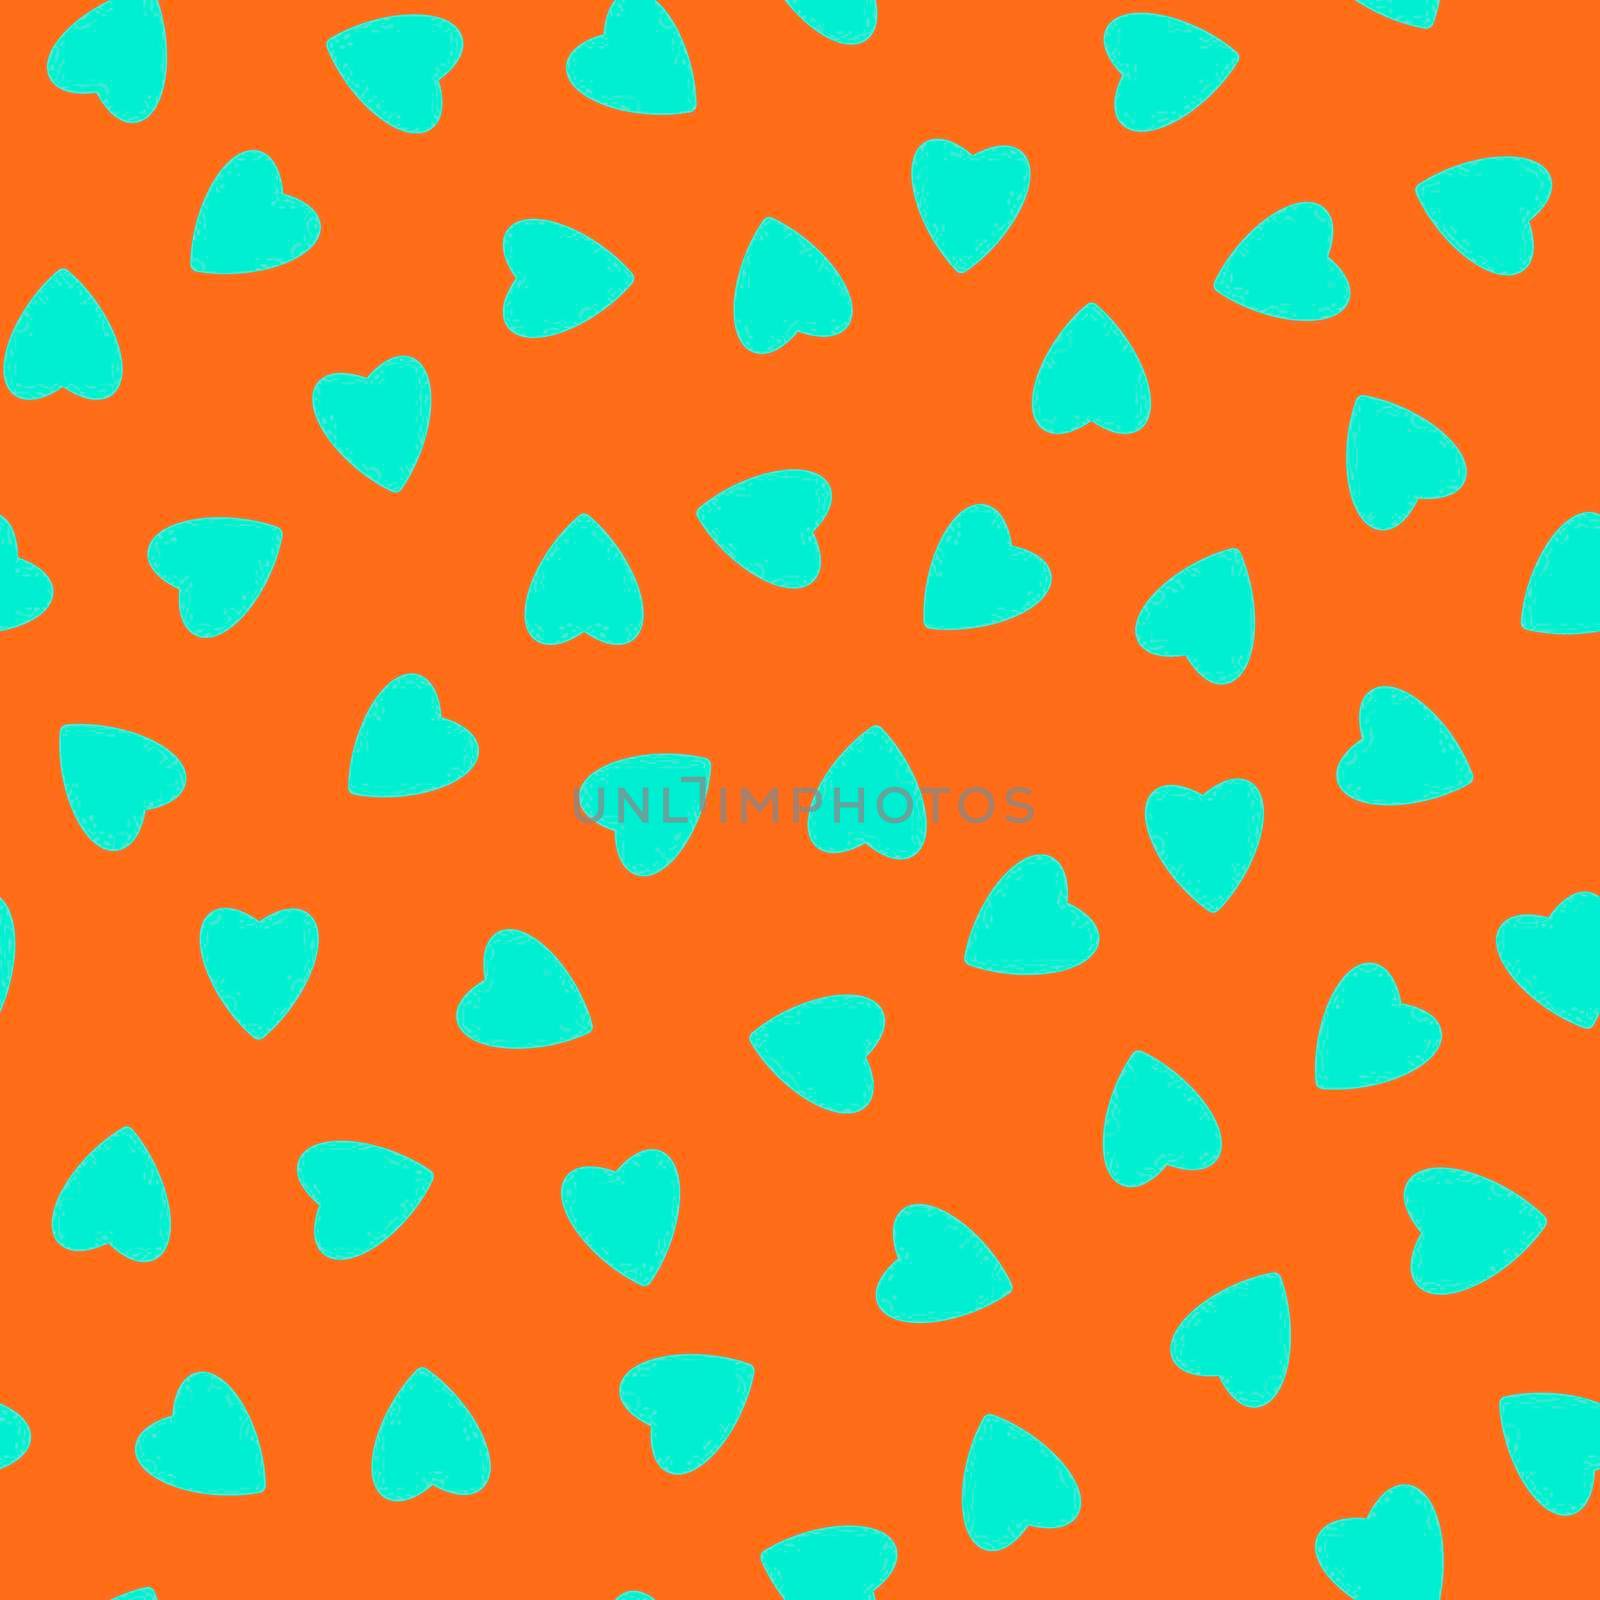 Simple hearts seamless pattern,endless chaotic texture made of tiny heart silhouettes.Valentines,mothers day background.Great for Easter,wedding,scrapbook,gift wrapping paper,textiles.Azure on orange.